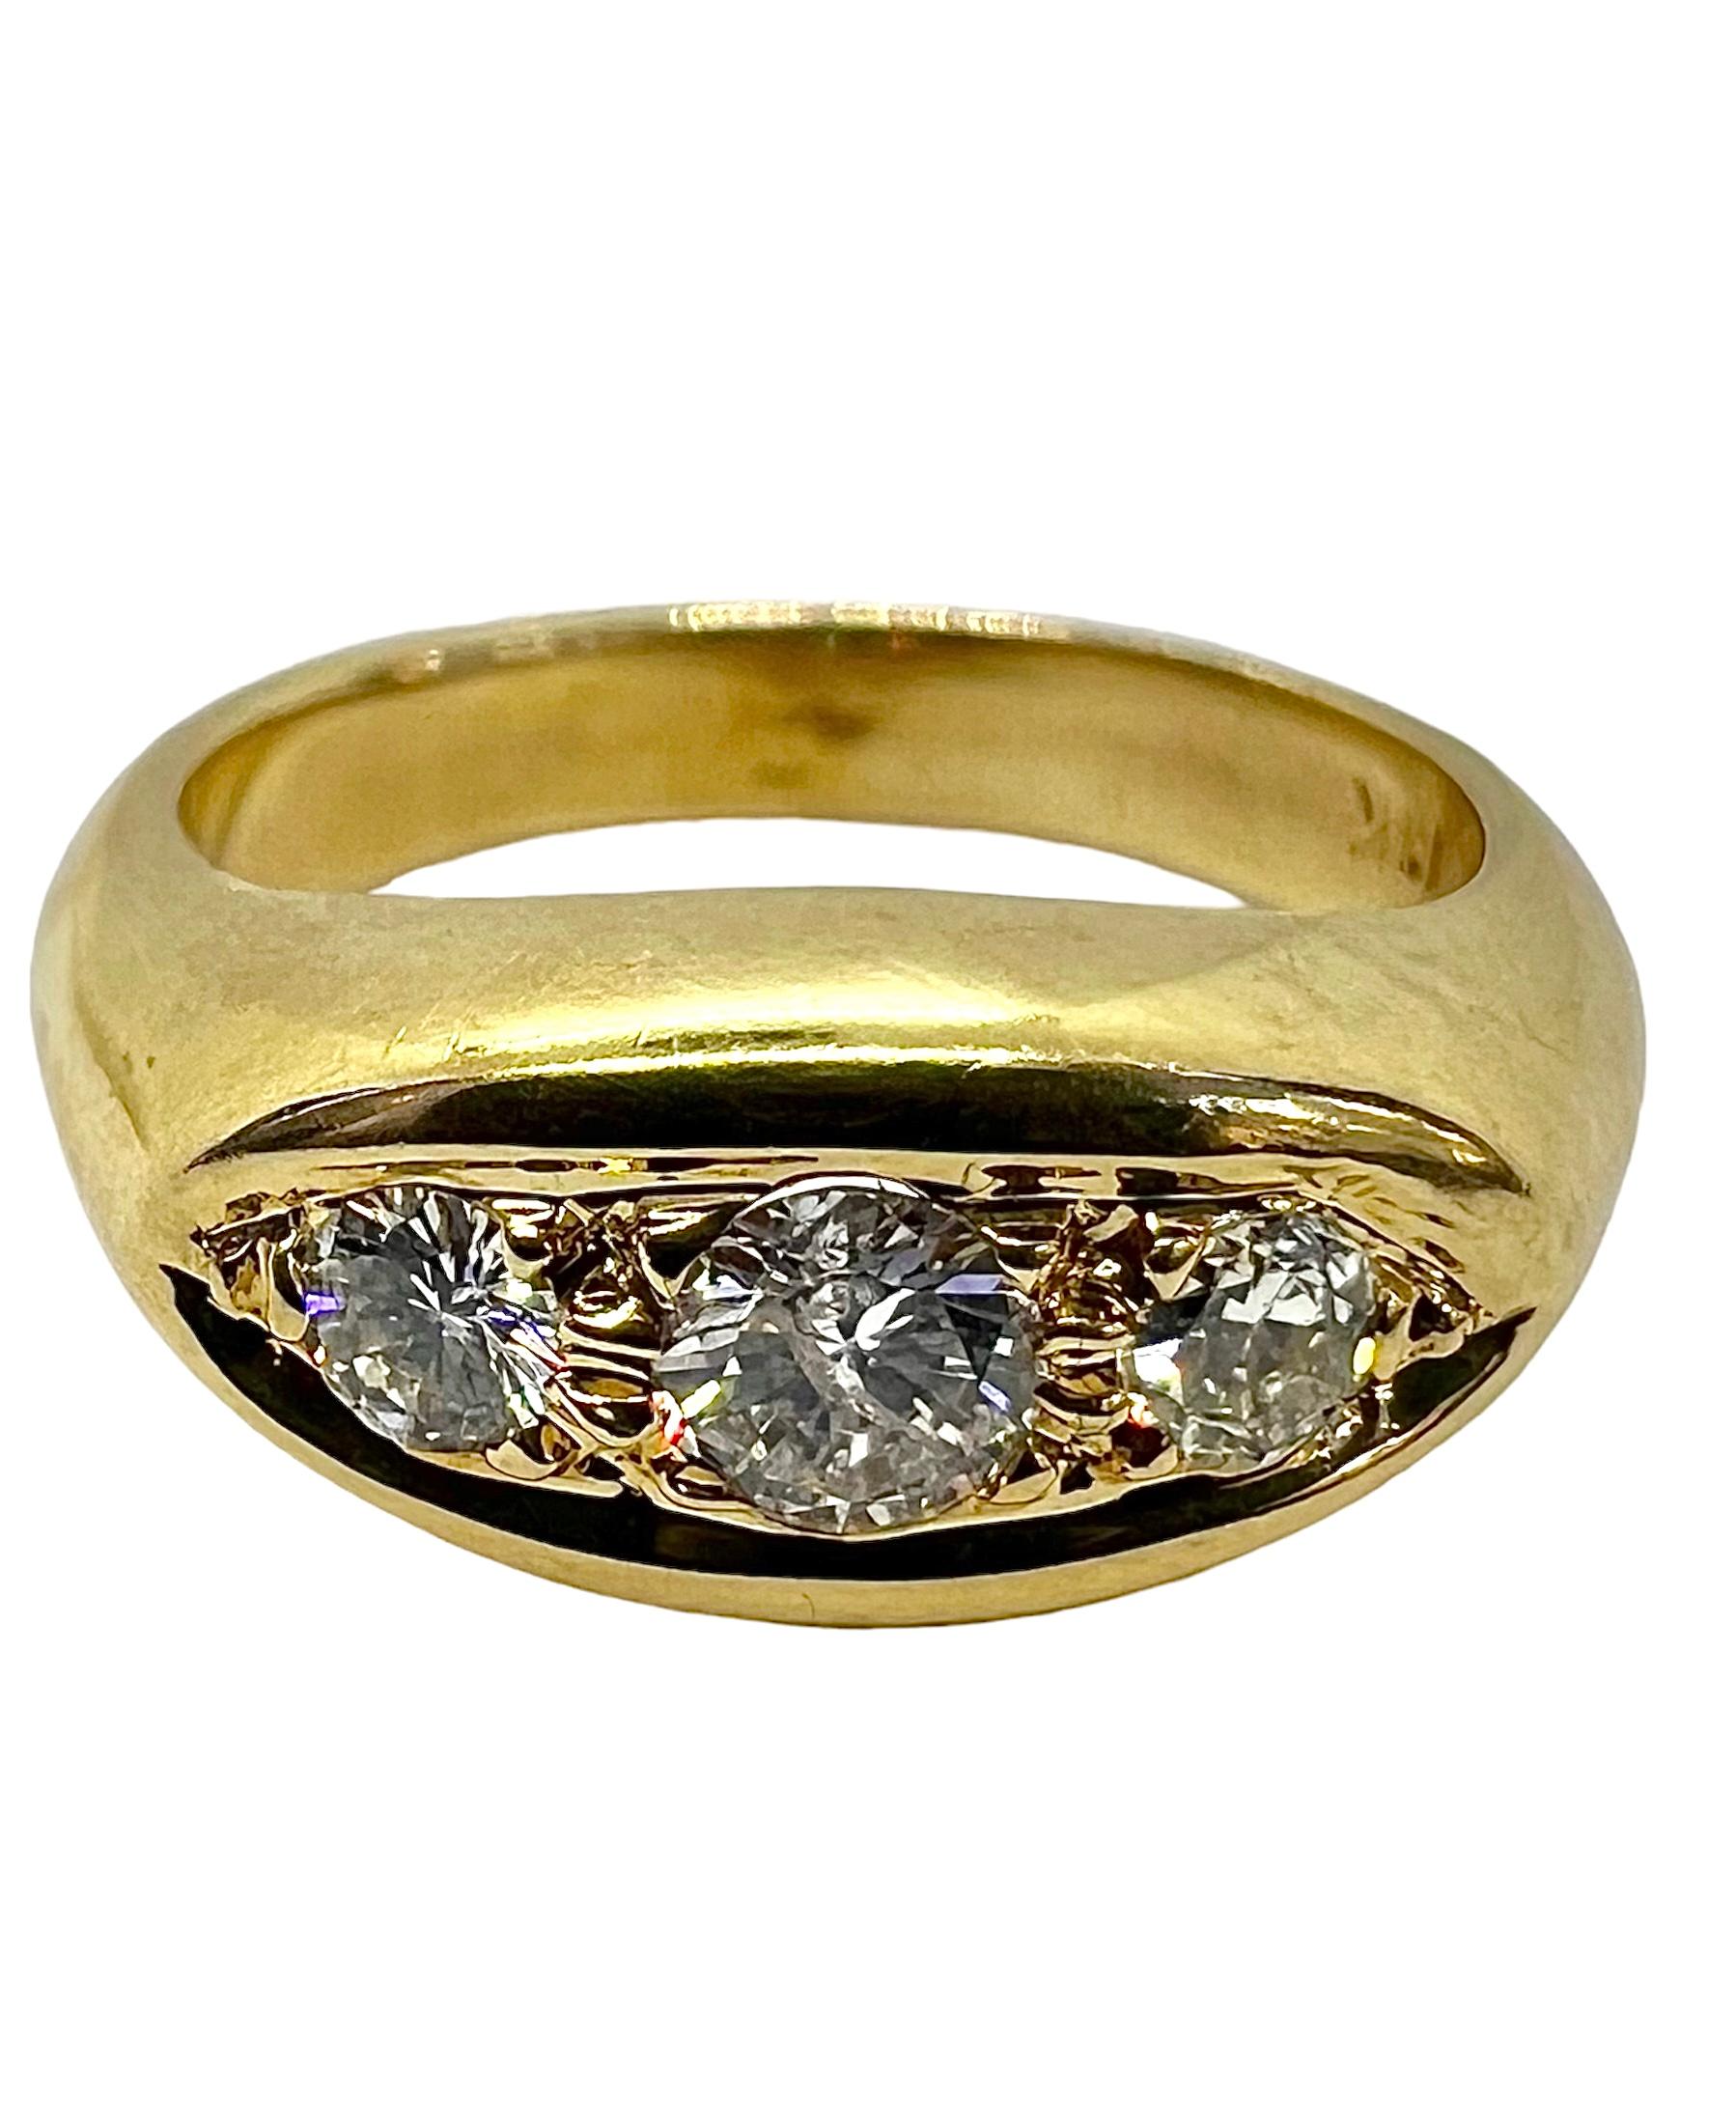 14K yellow gold ring with 3 round diamonds.

Sophia D by Joseph Dardashti LTD has been known worldwide for 35 years and are inspired by classic Art Deco design that merges with modern manufacturing techniques. 